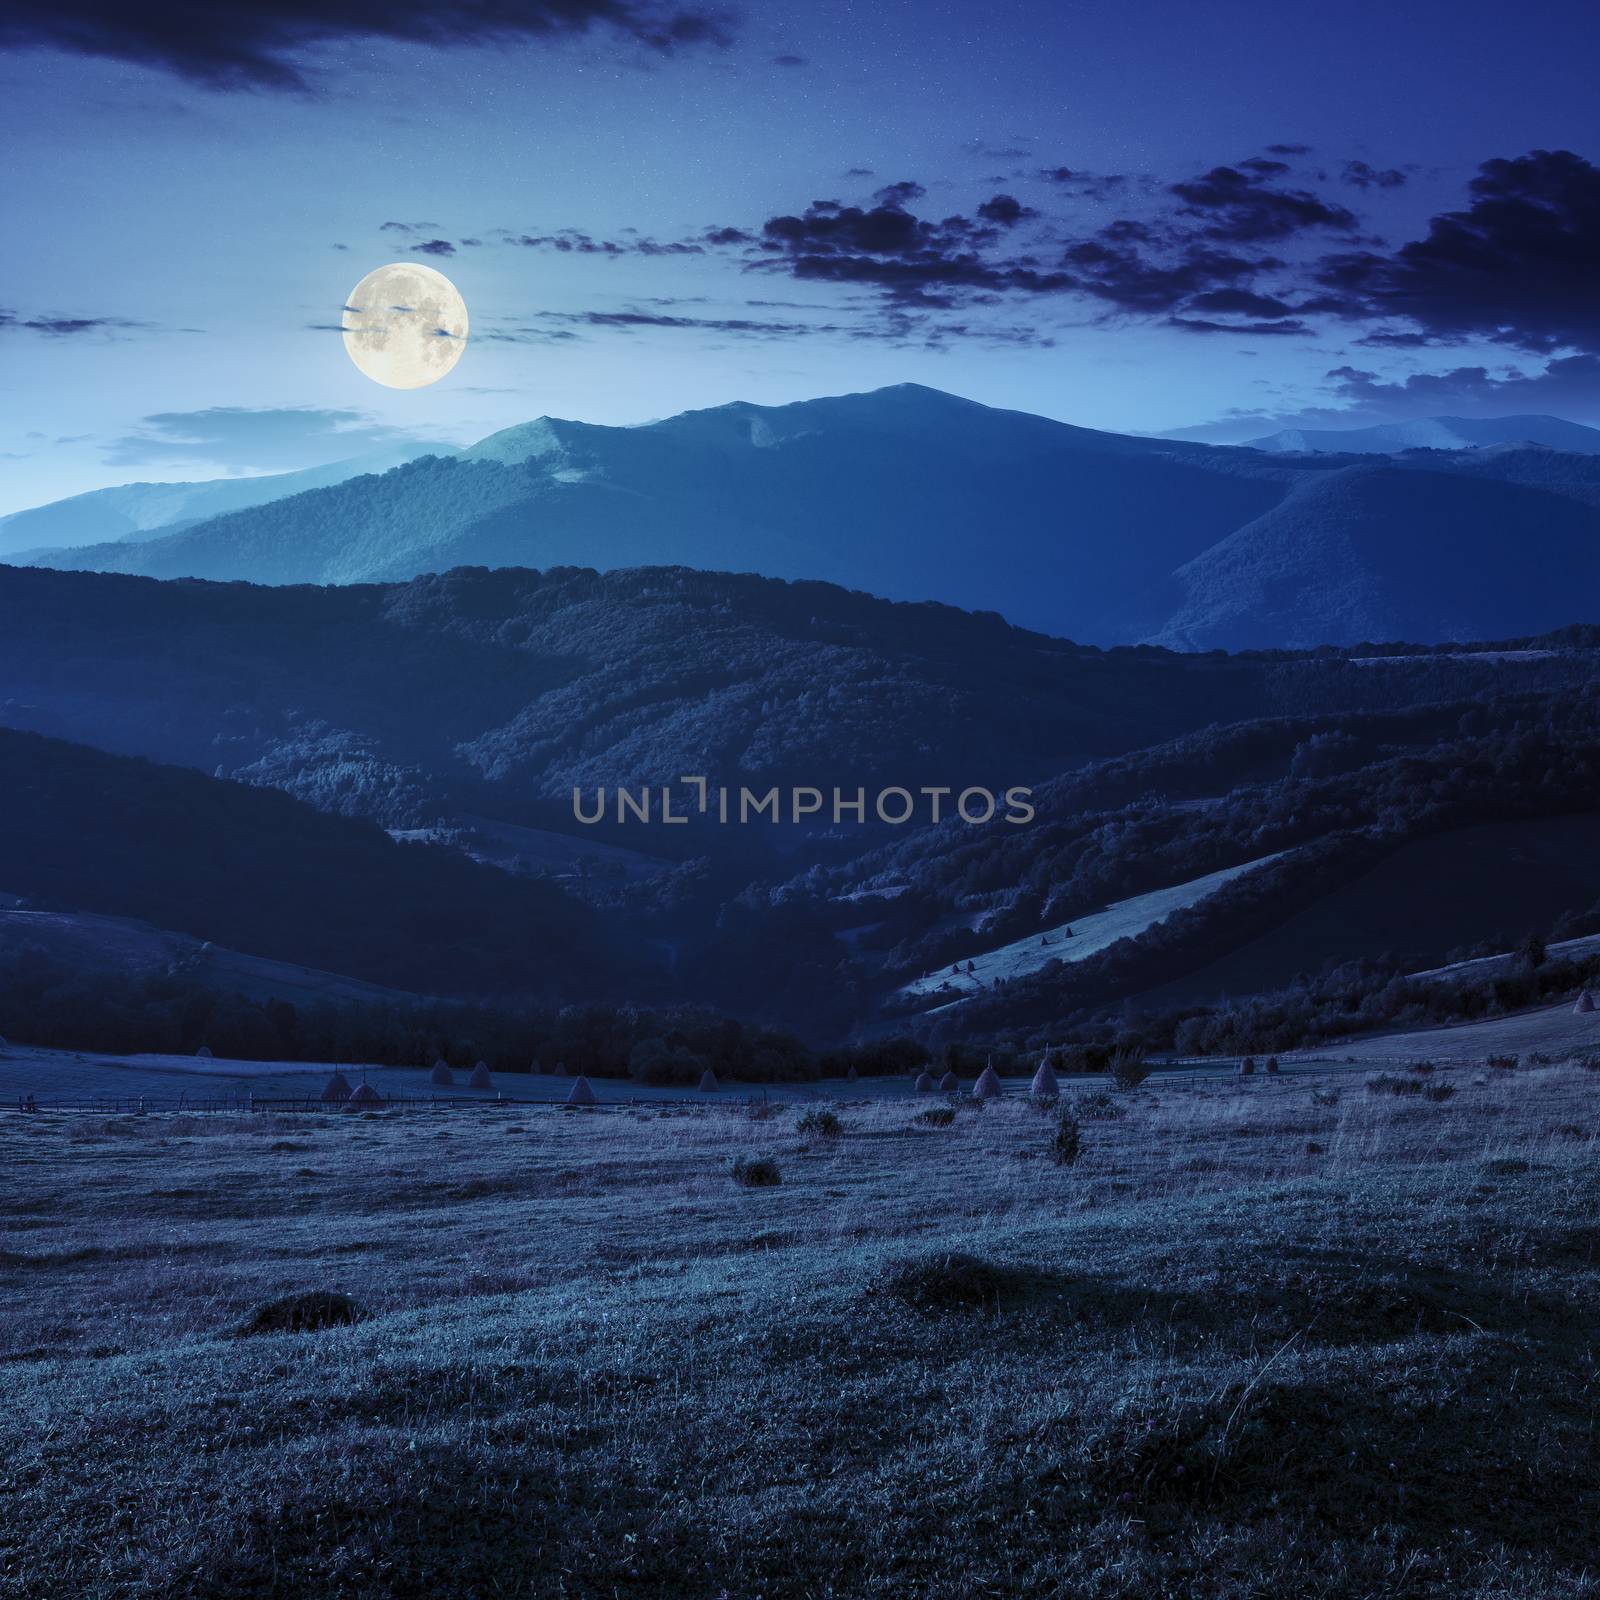 Stacks of hay on a green meadow on hillside  in mountains at night in full moon light